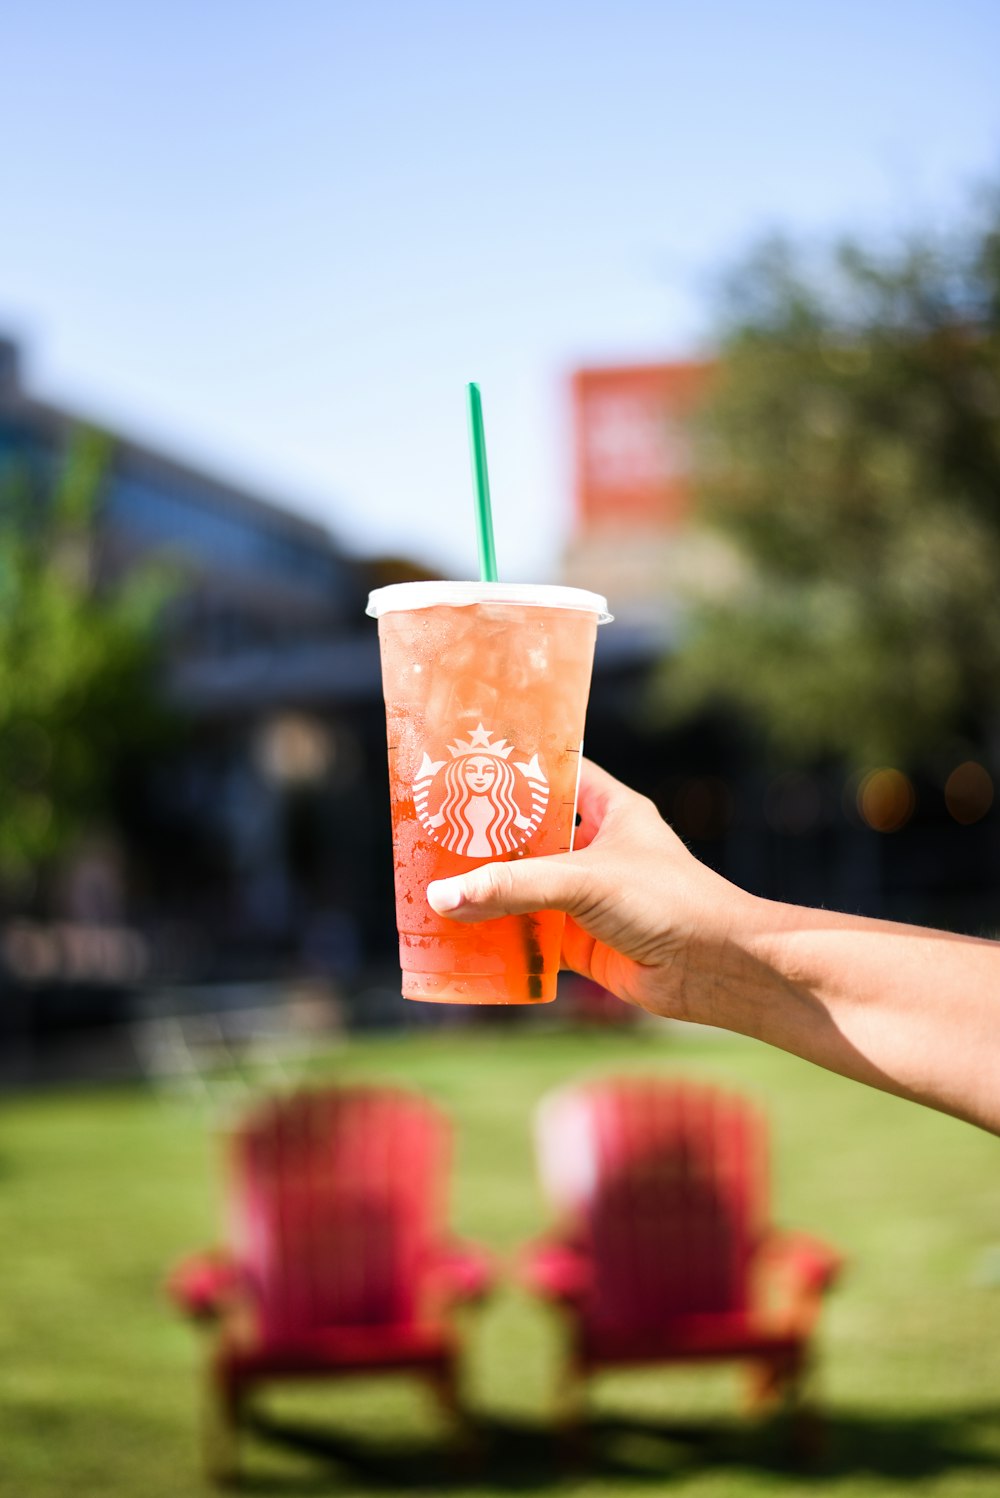 person holding orange and white plastic cup with green straw